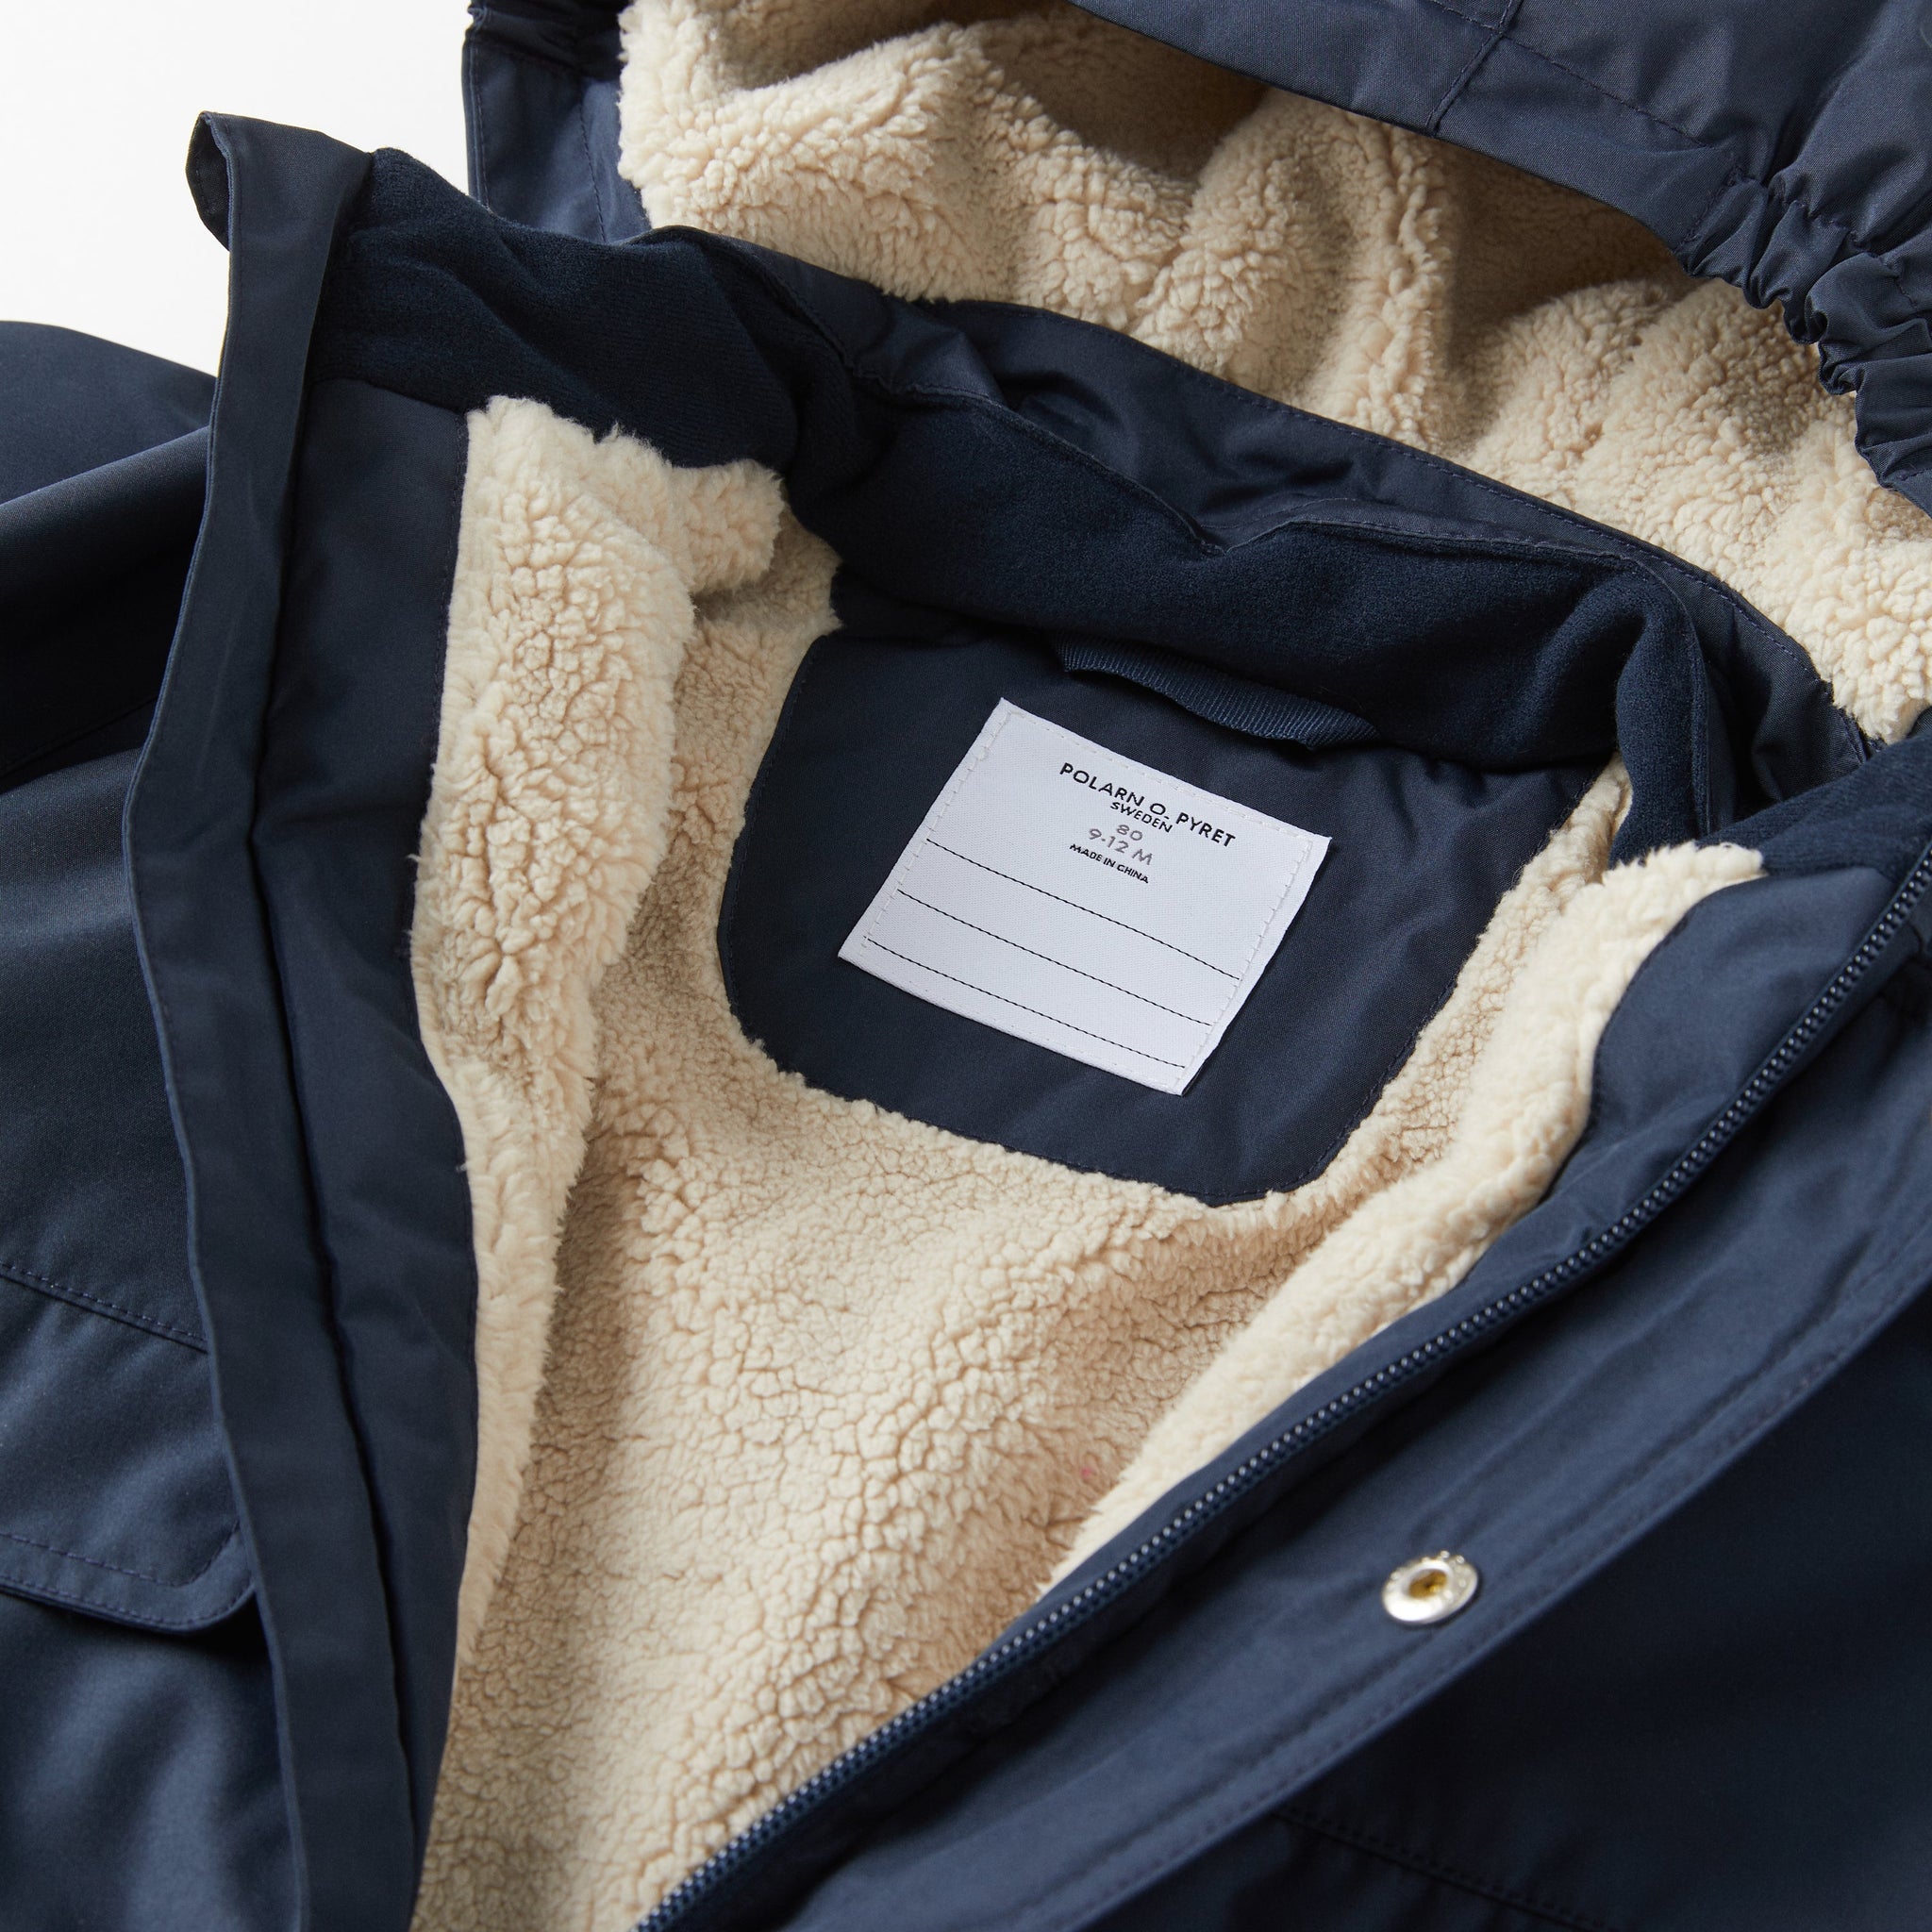 Padded Navy Baby Coat from the Polarn O. Pyret kidswear collection. Made using ethically sourced materials.